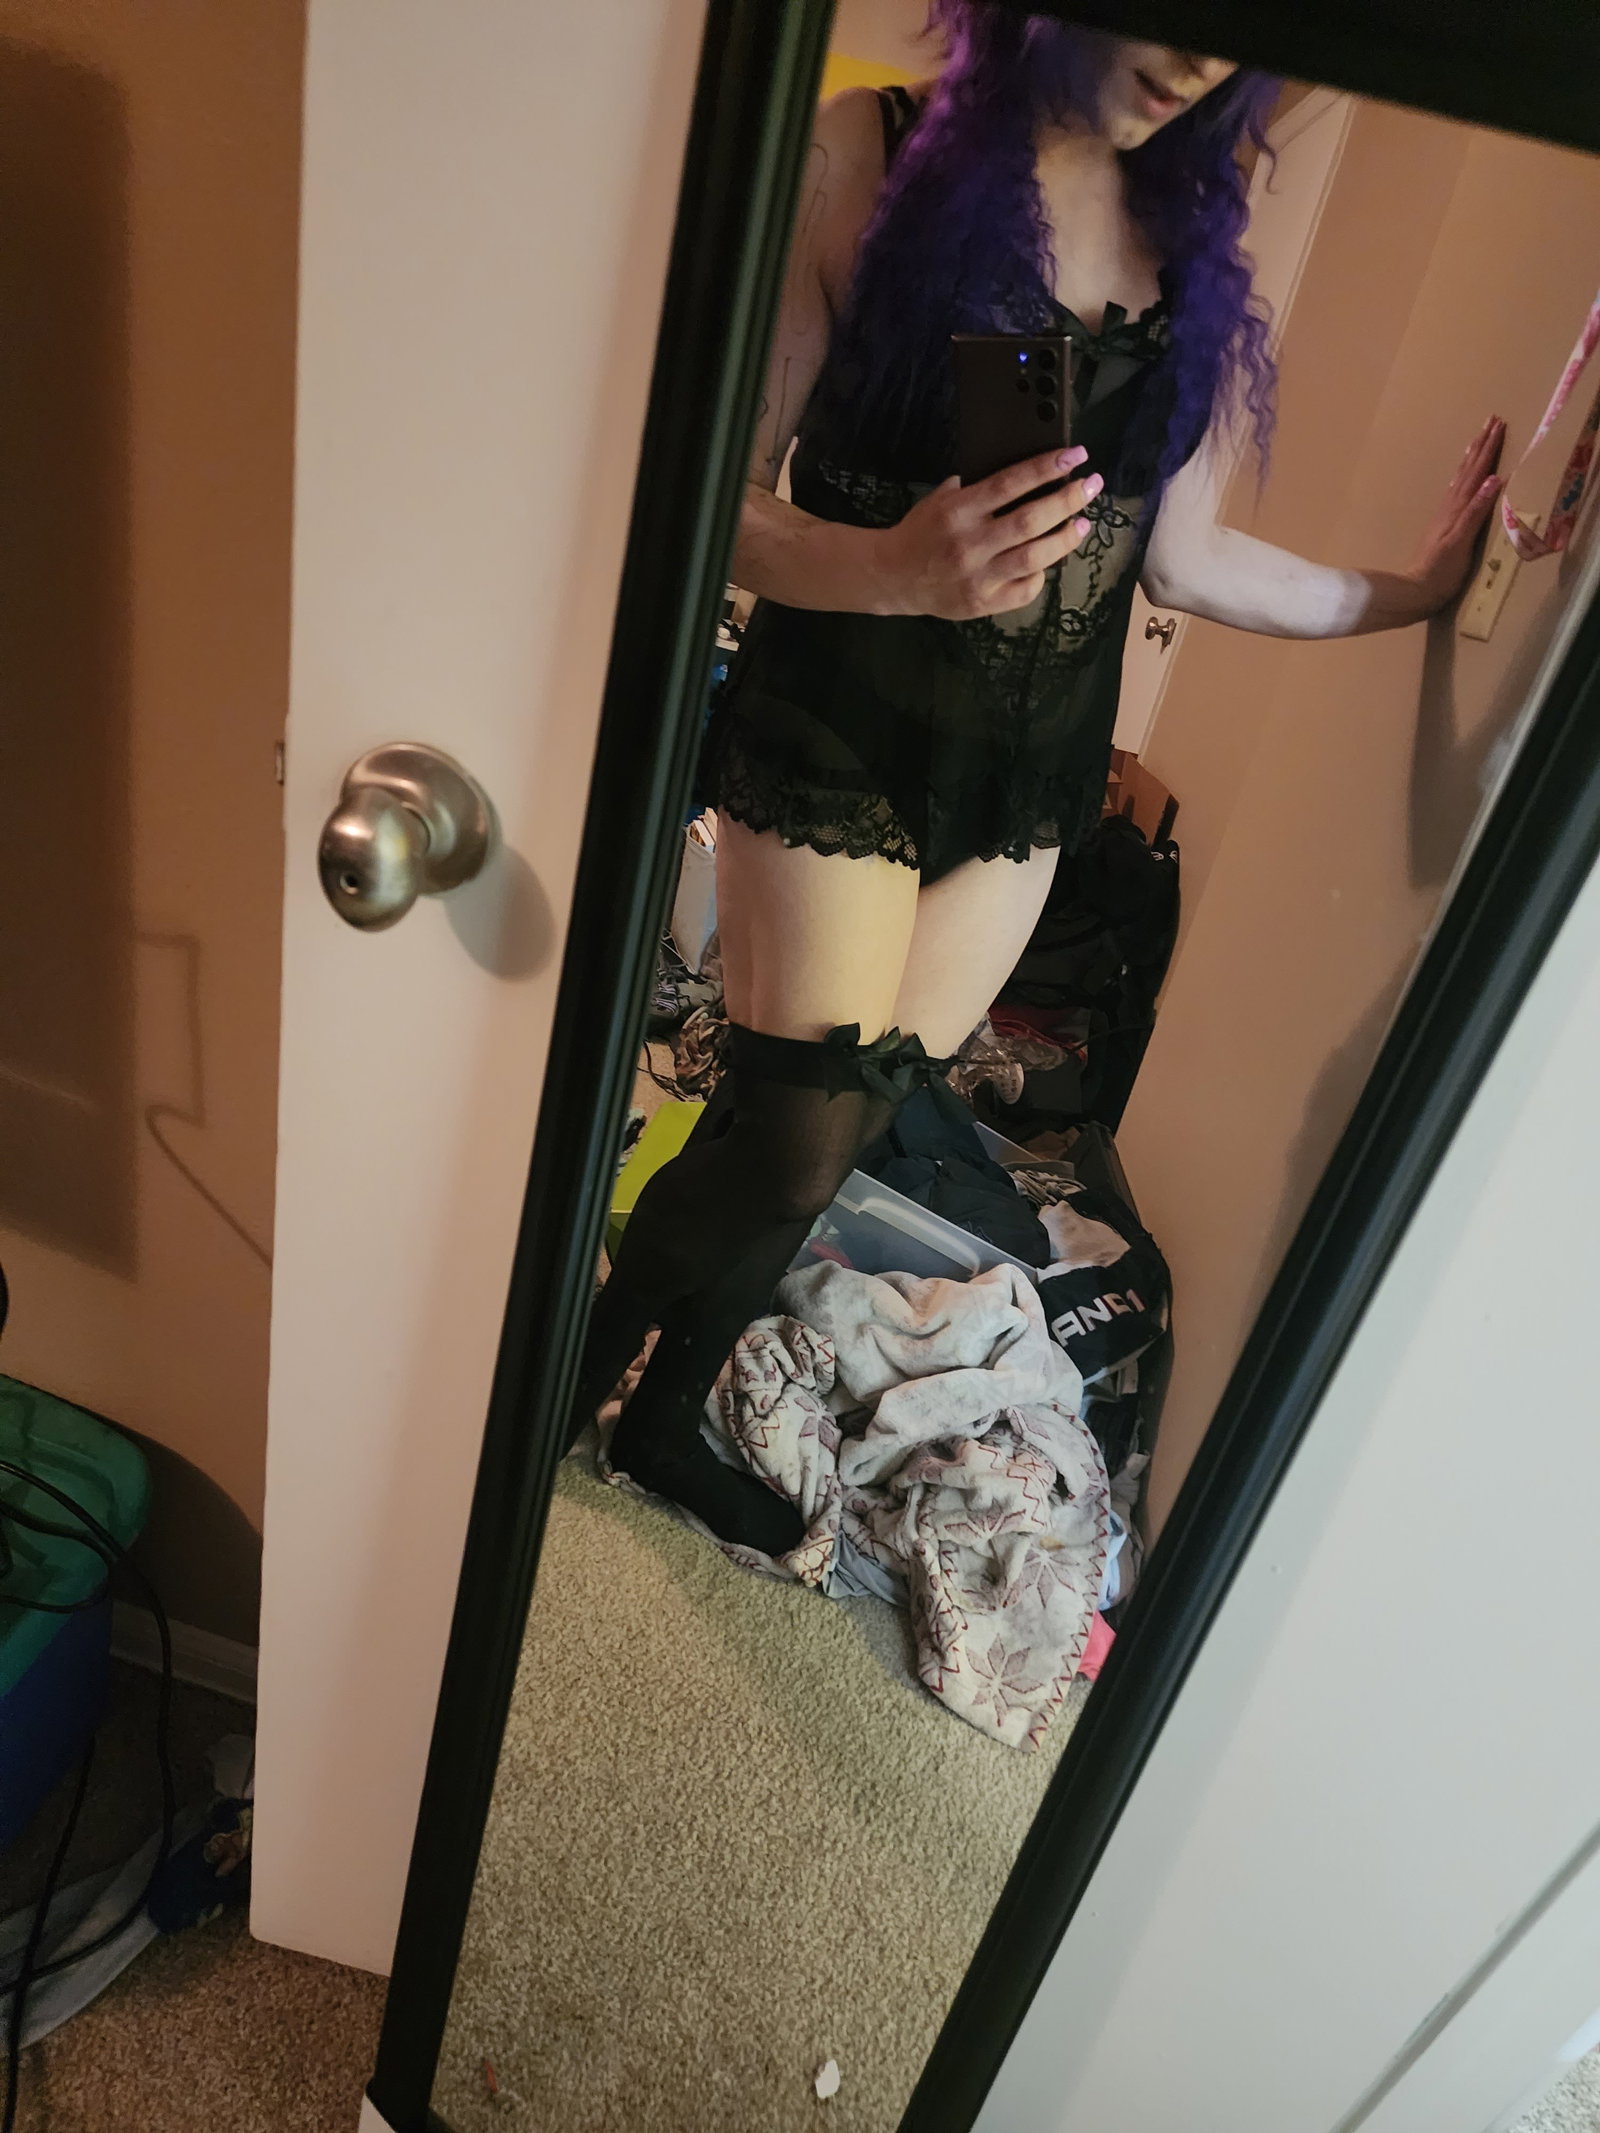 Photo by KonekoWaifu with the username @LittleNekoGirl,  February 21, 2023 at 12:46 AM. The post is about the topic Trans Women and the text says 'when you get dressed all sexy but no one there to turn you into a dripping mess, this girl needs that deep pounding! #lgbtq #polyamorous #girlnextdoor #Tgirl #Trans #lingerie'